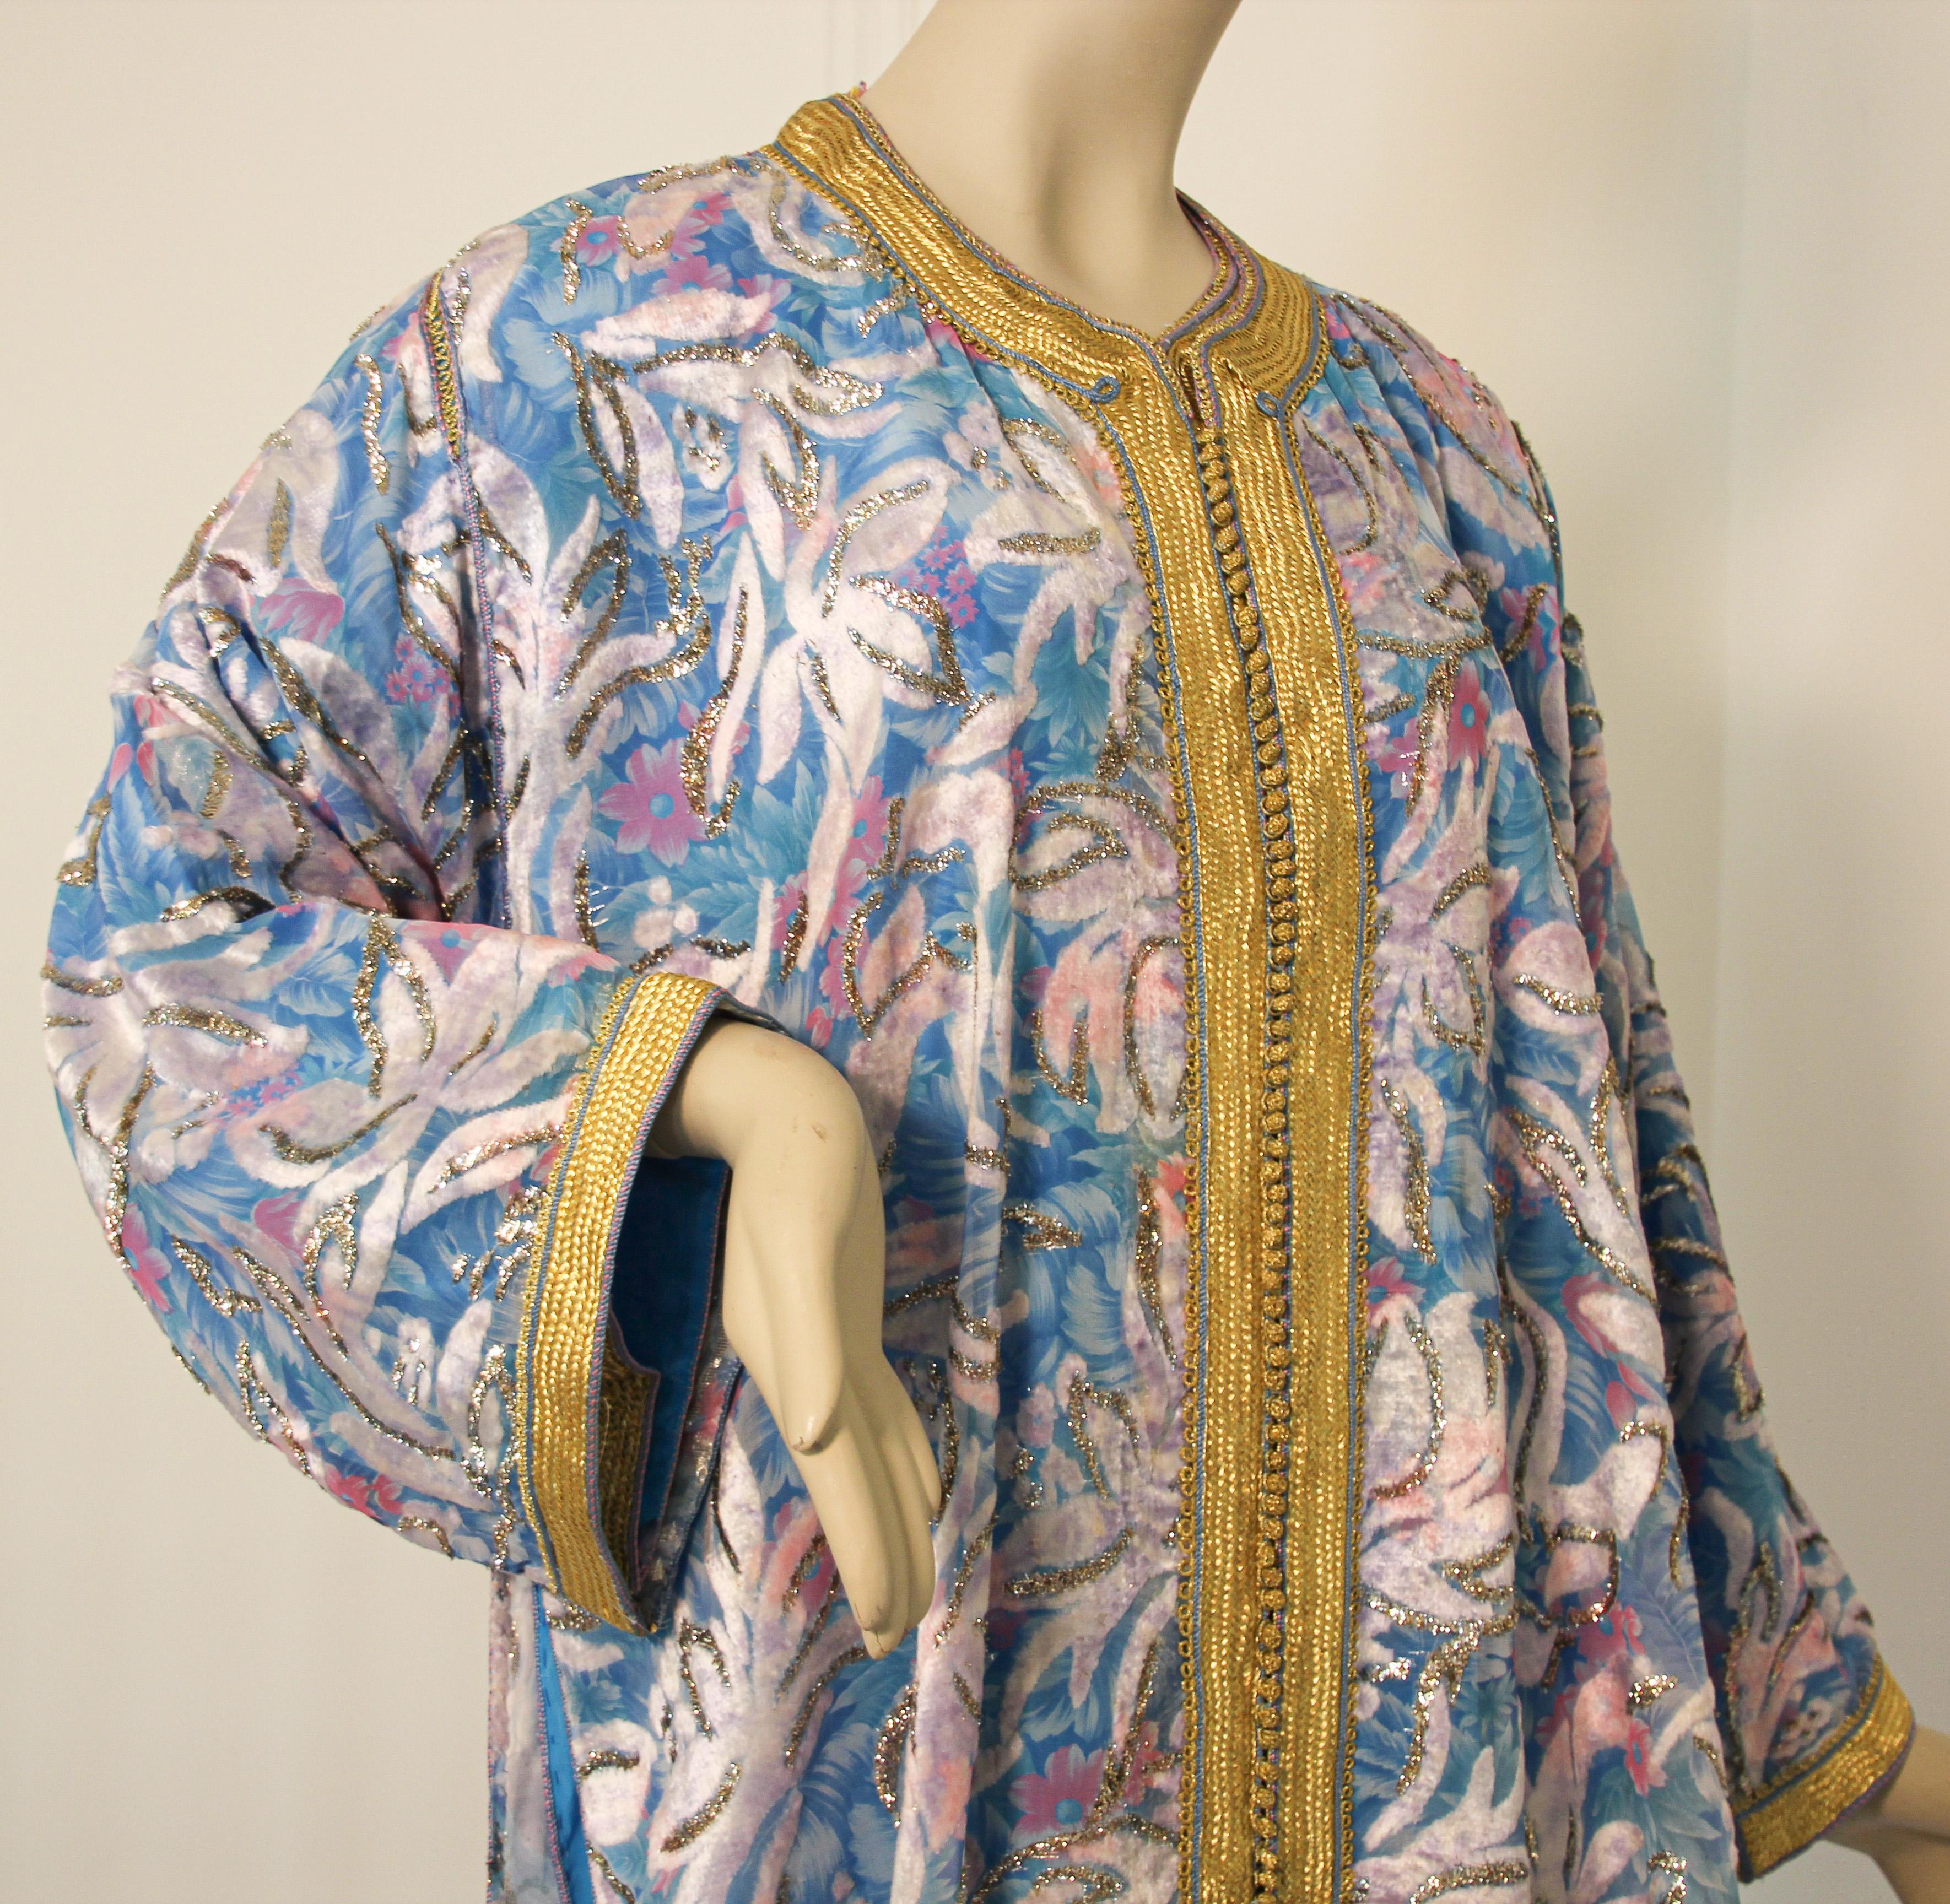 Gray Moroccan Kaftan in Turquoise and Gold Floral Brocade Metallic Lame For Sale